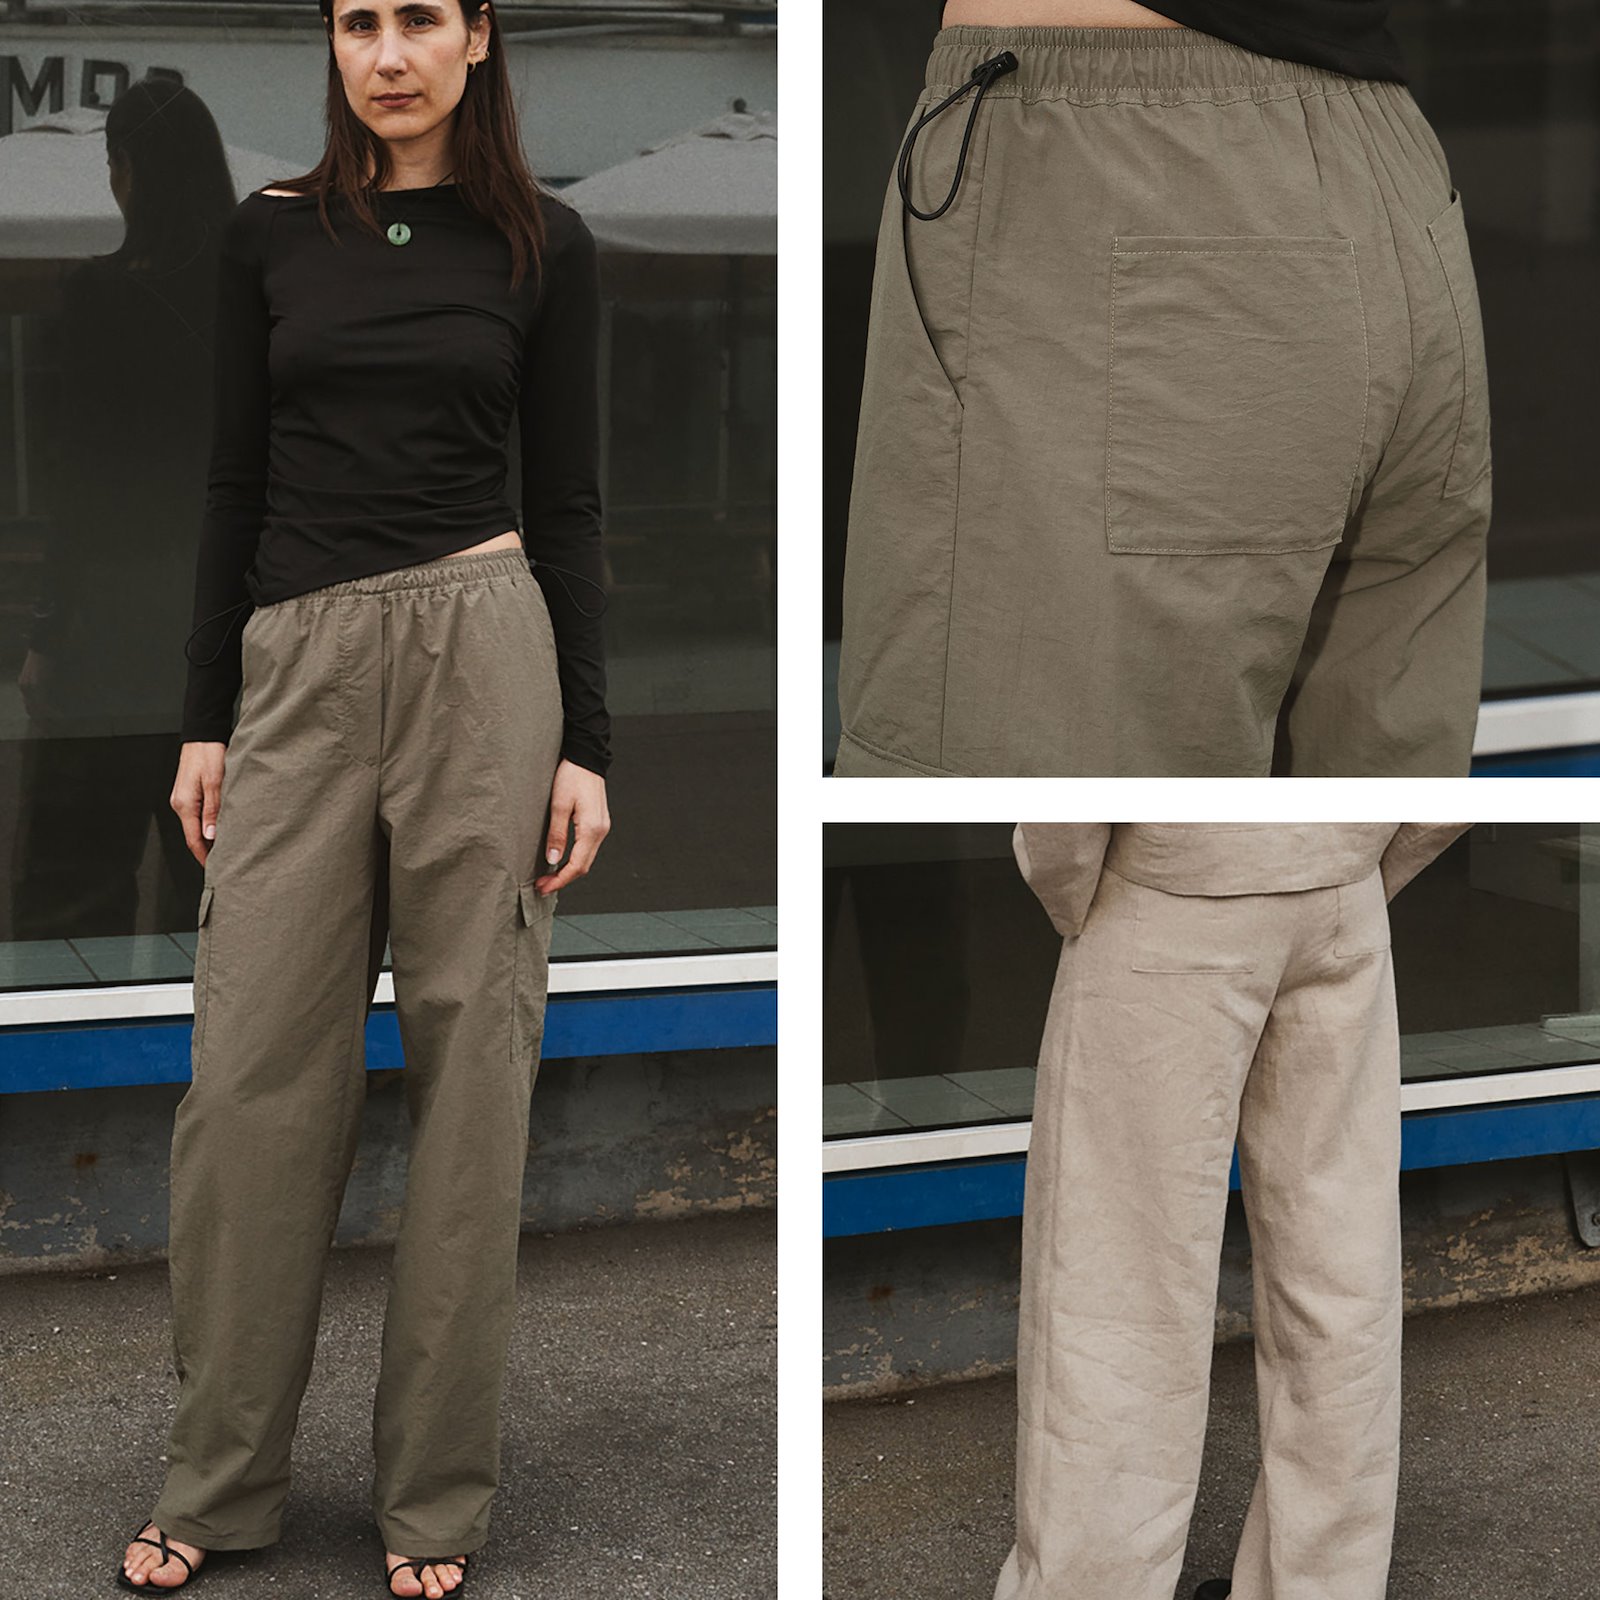 Puff and Pencil sewing pattern "Versa pants" 1100304_pack_d.jpg